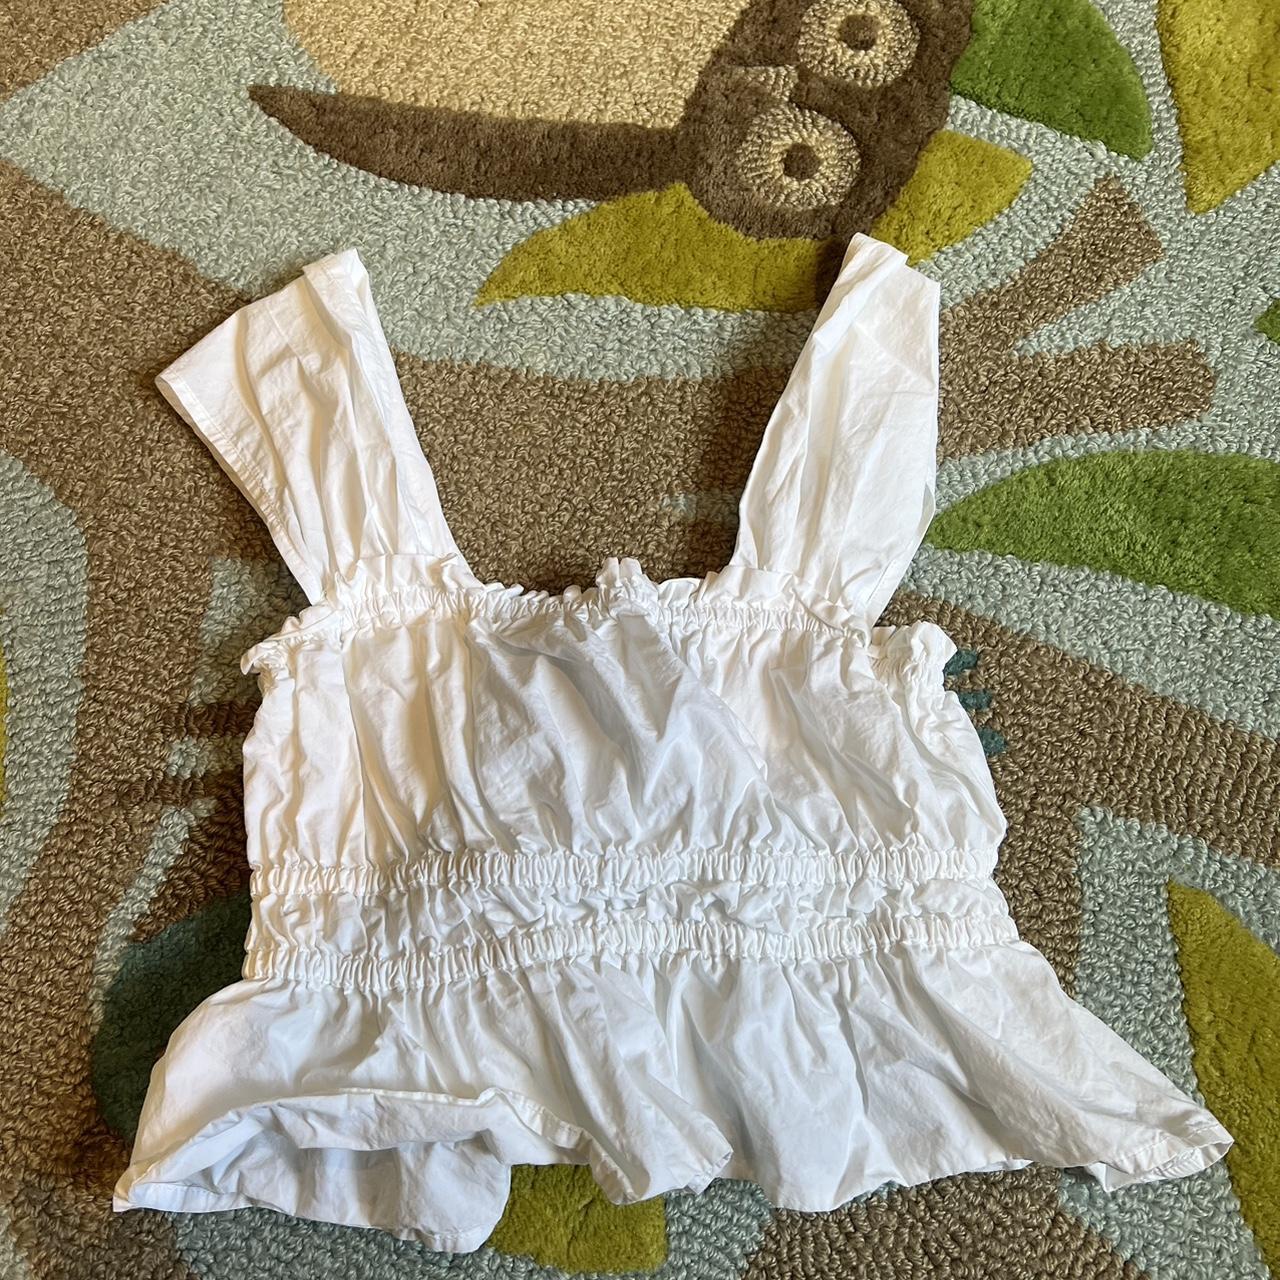 cute white going out top🤍🤍 brand: emory park (bought... - Depop